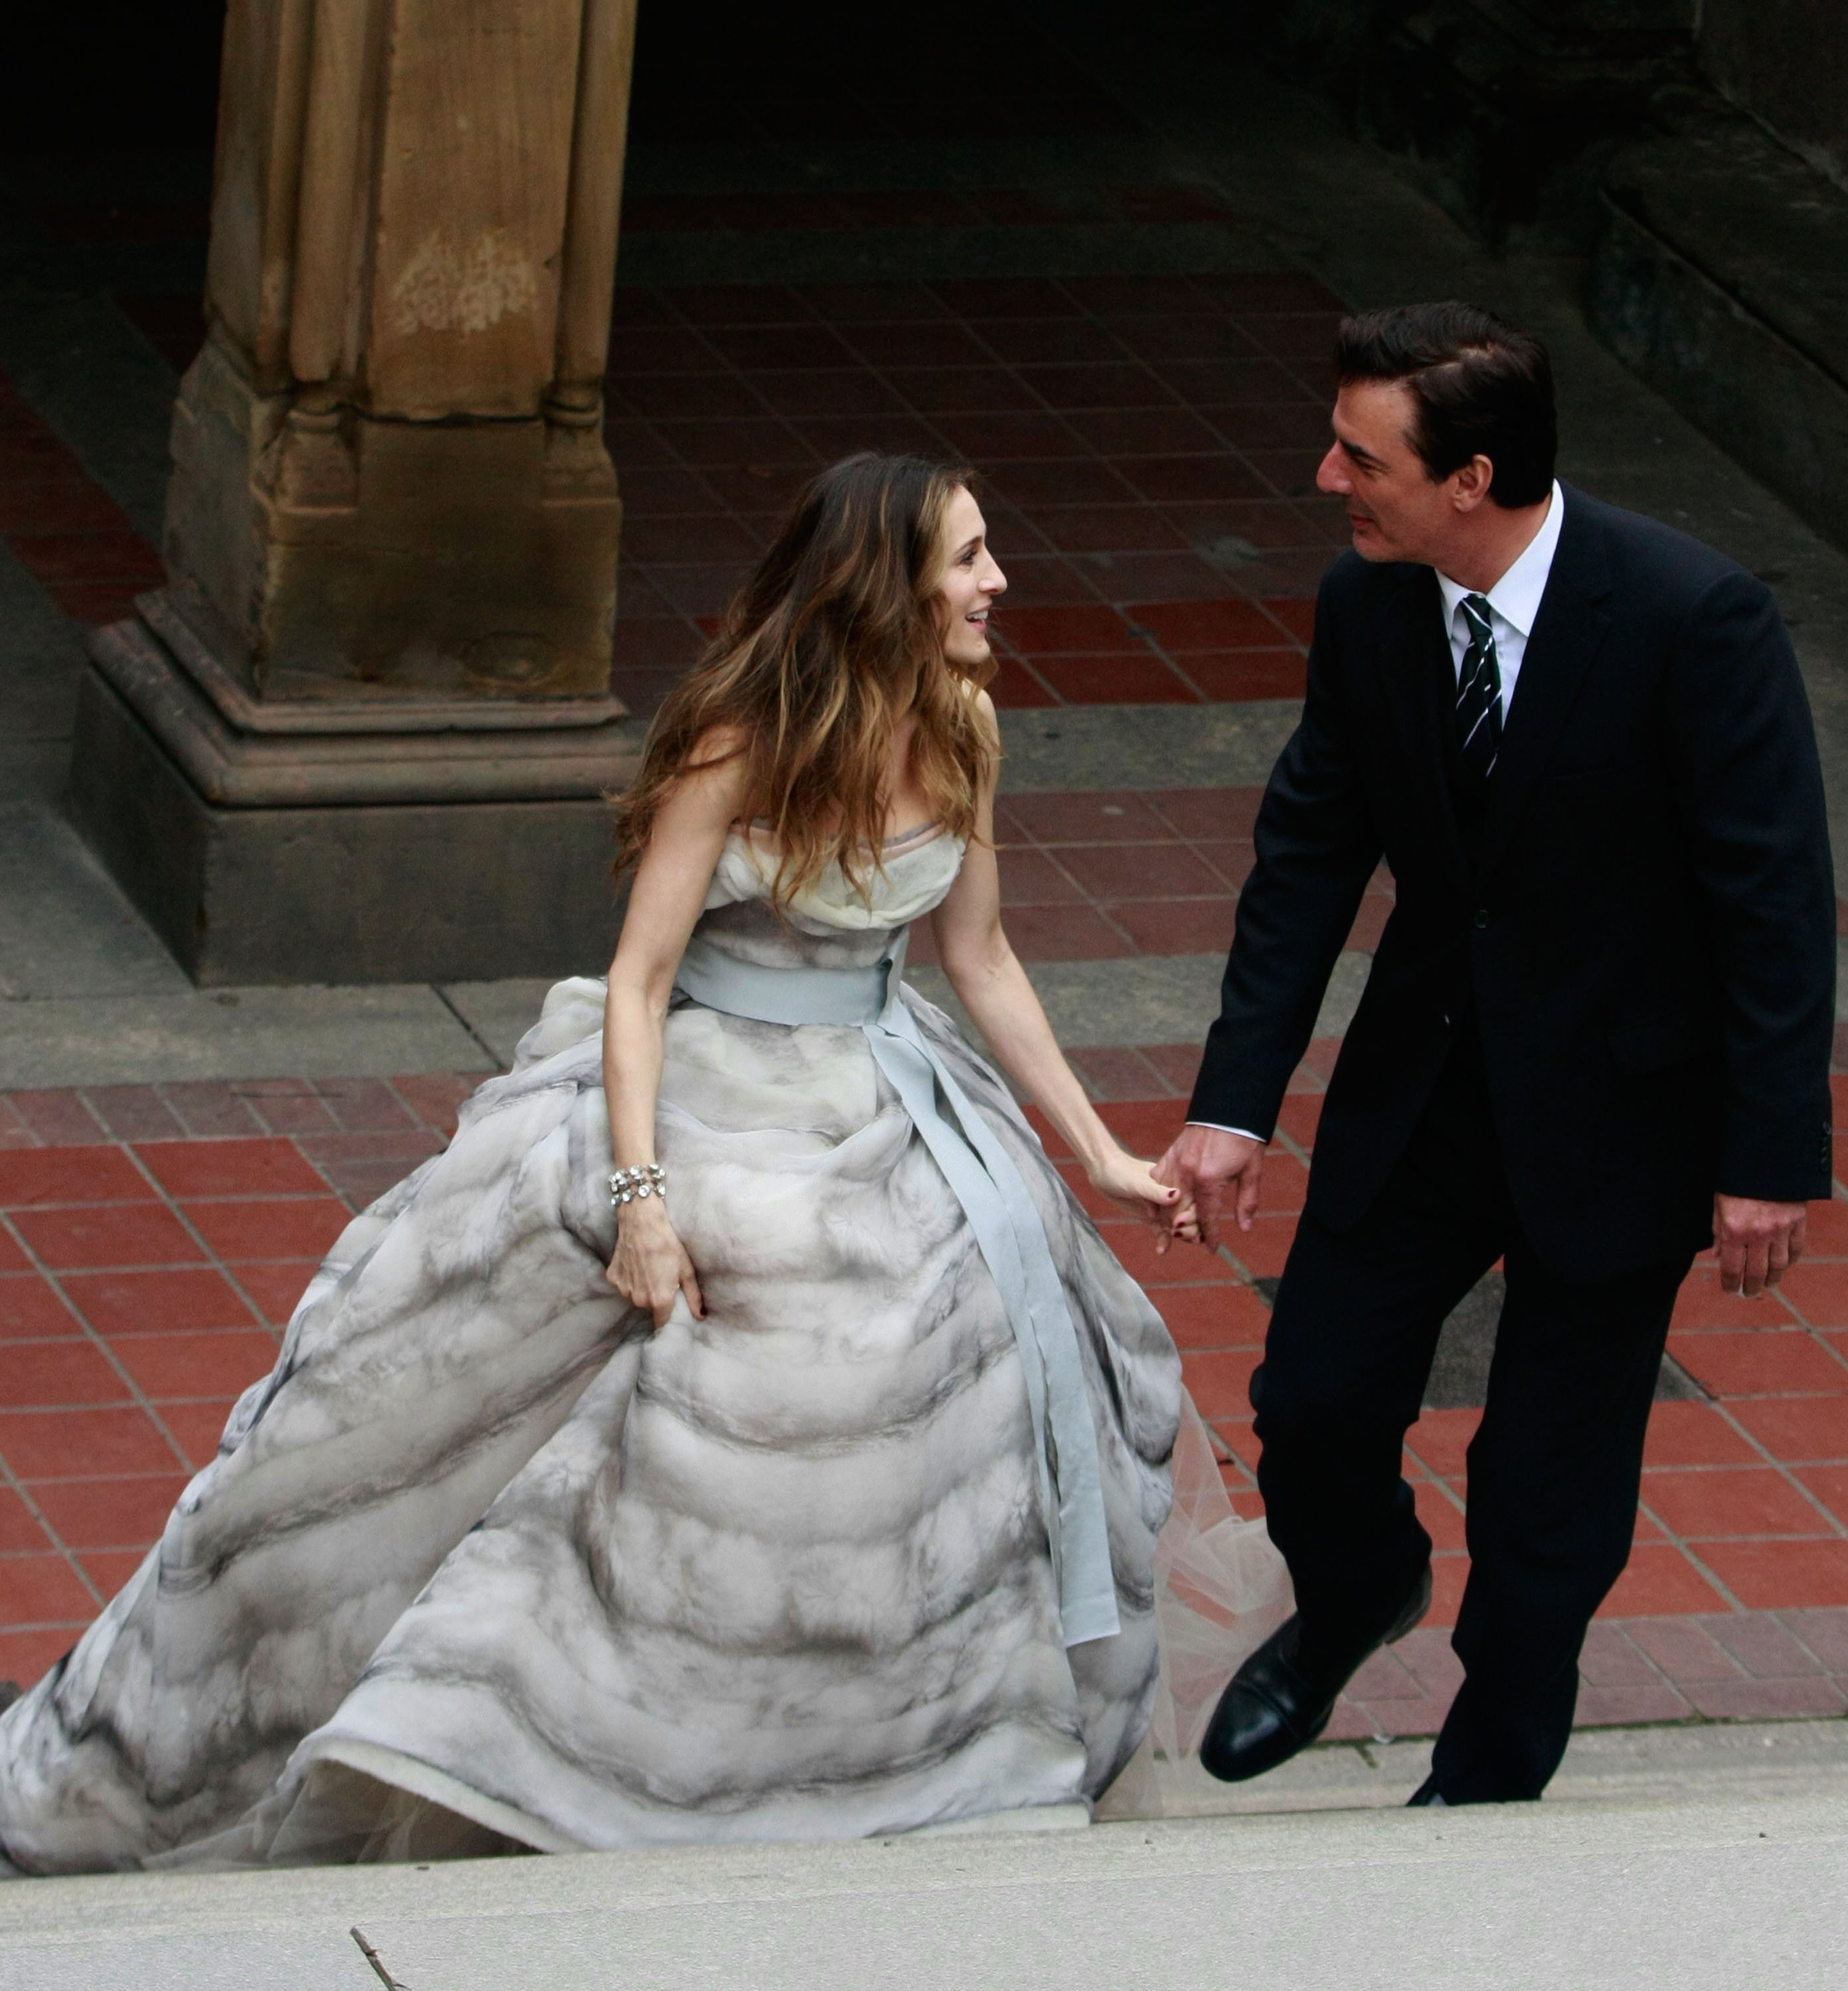 Sarah Jessica Parker and Chris Noth walk in Central Park holding hands during a photoshoot 